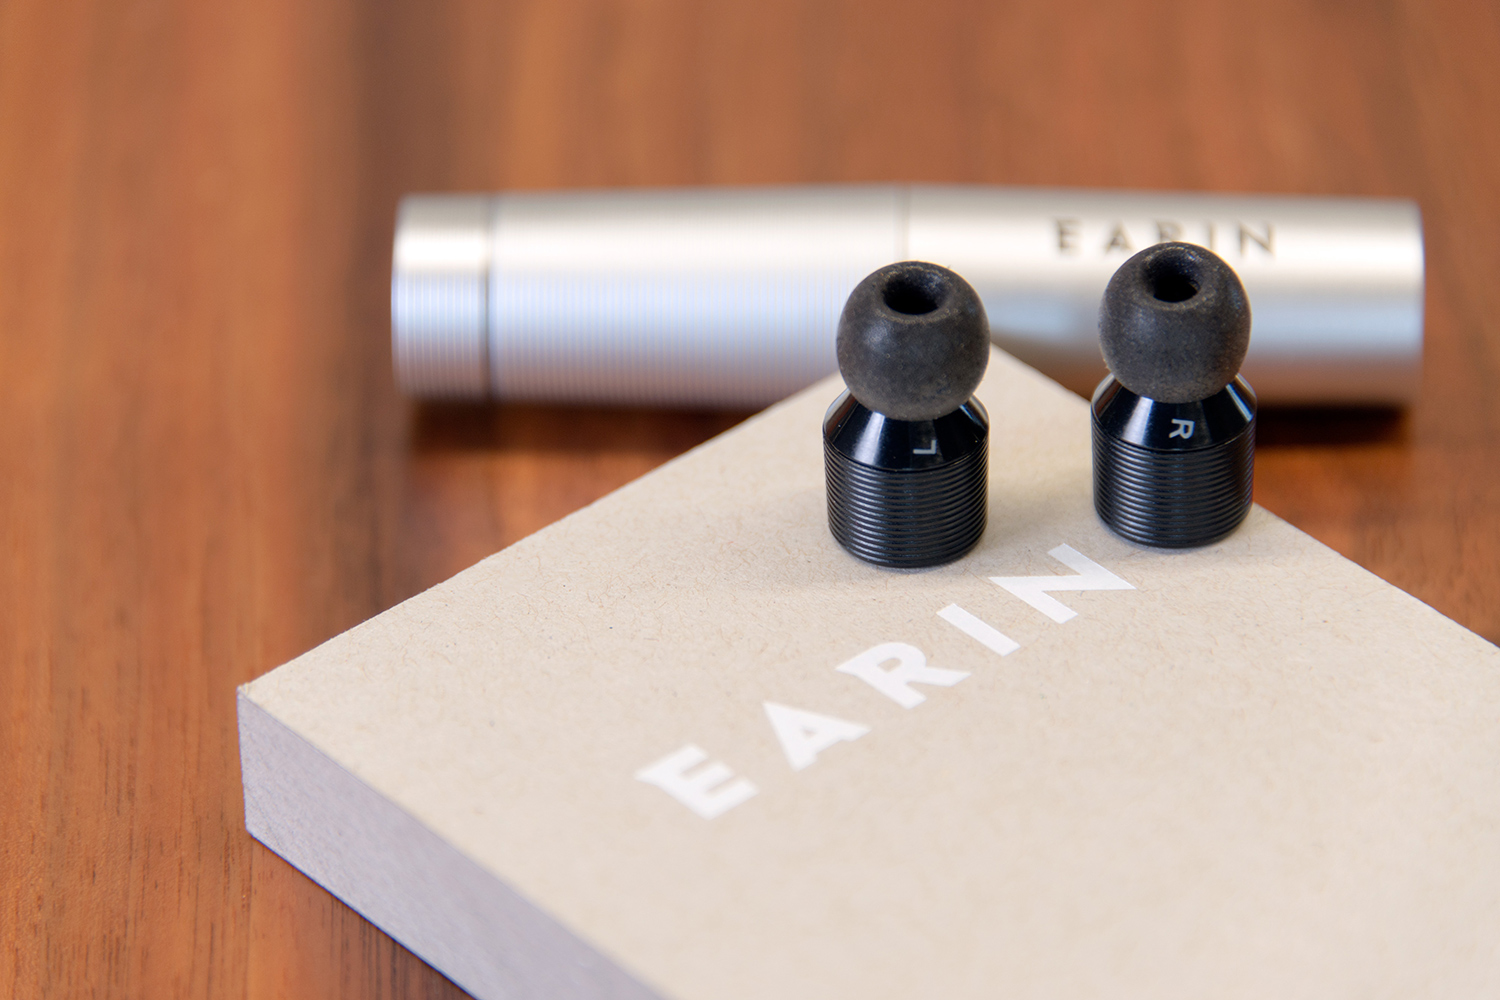 earin wireless earbuds hands on review video bt iso